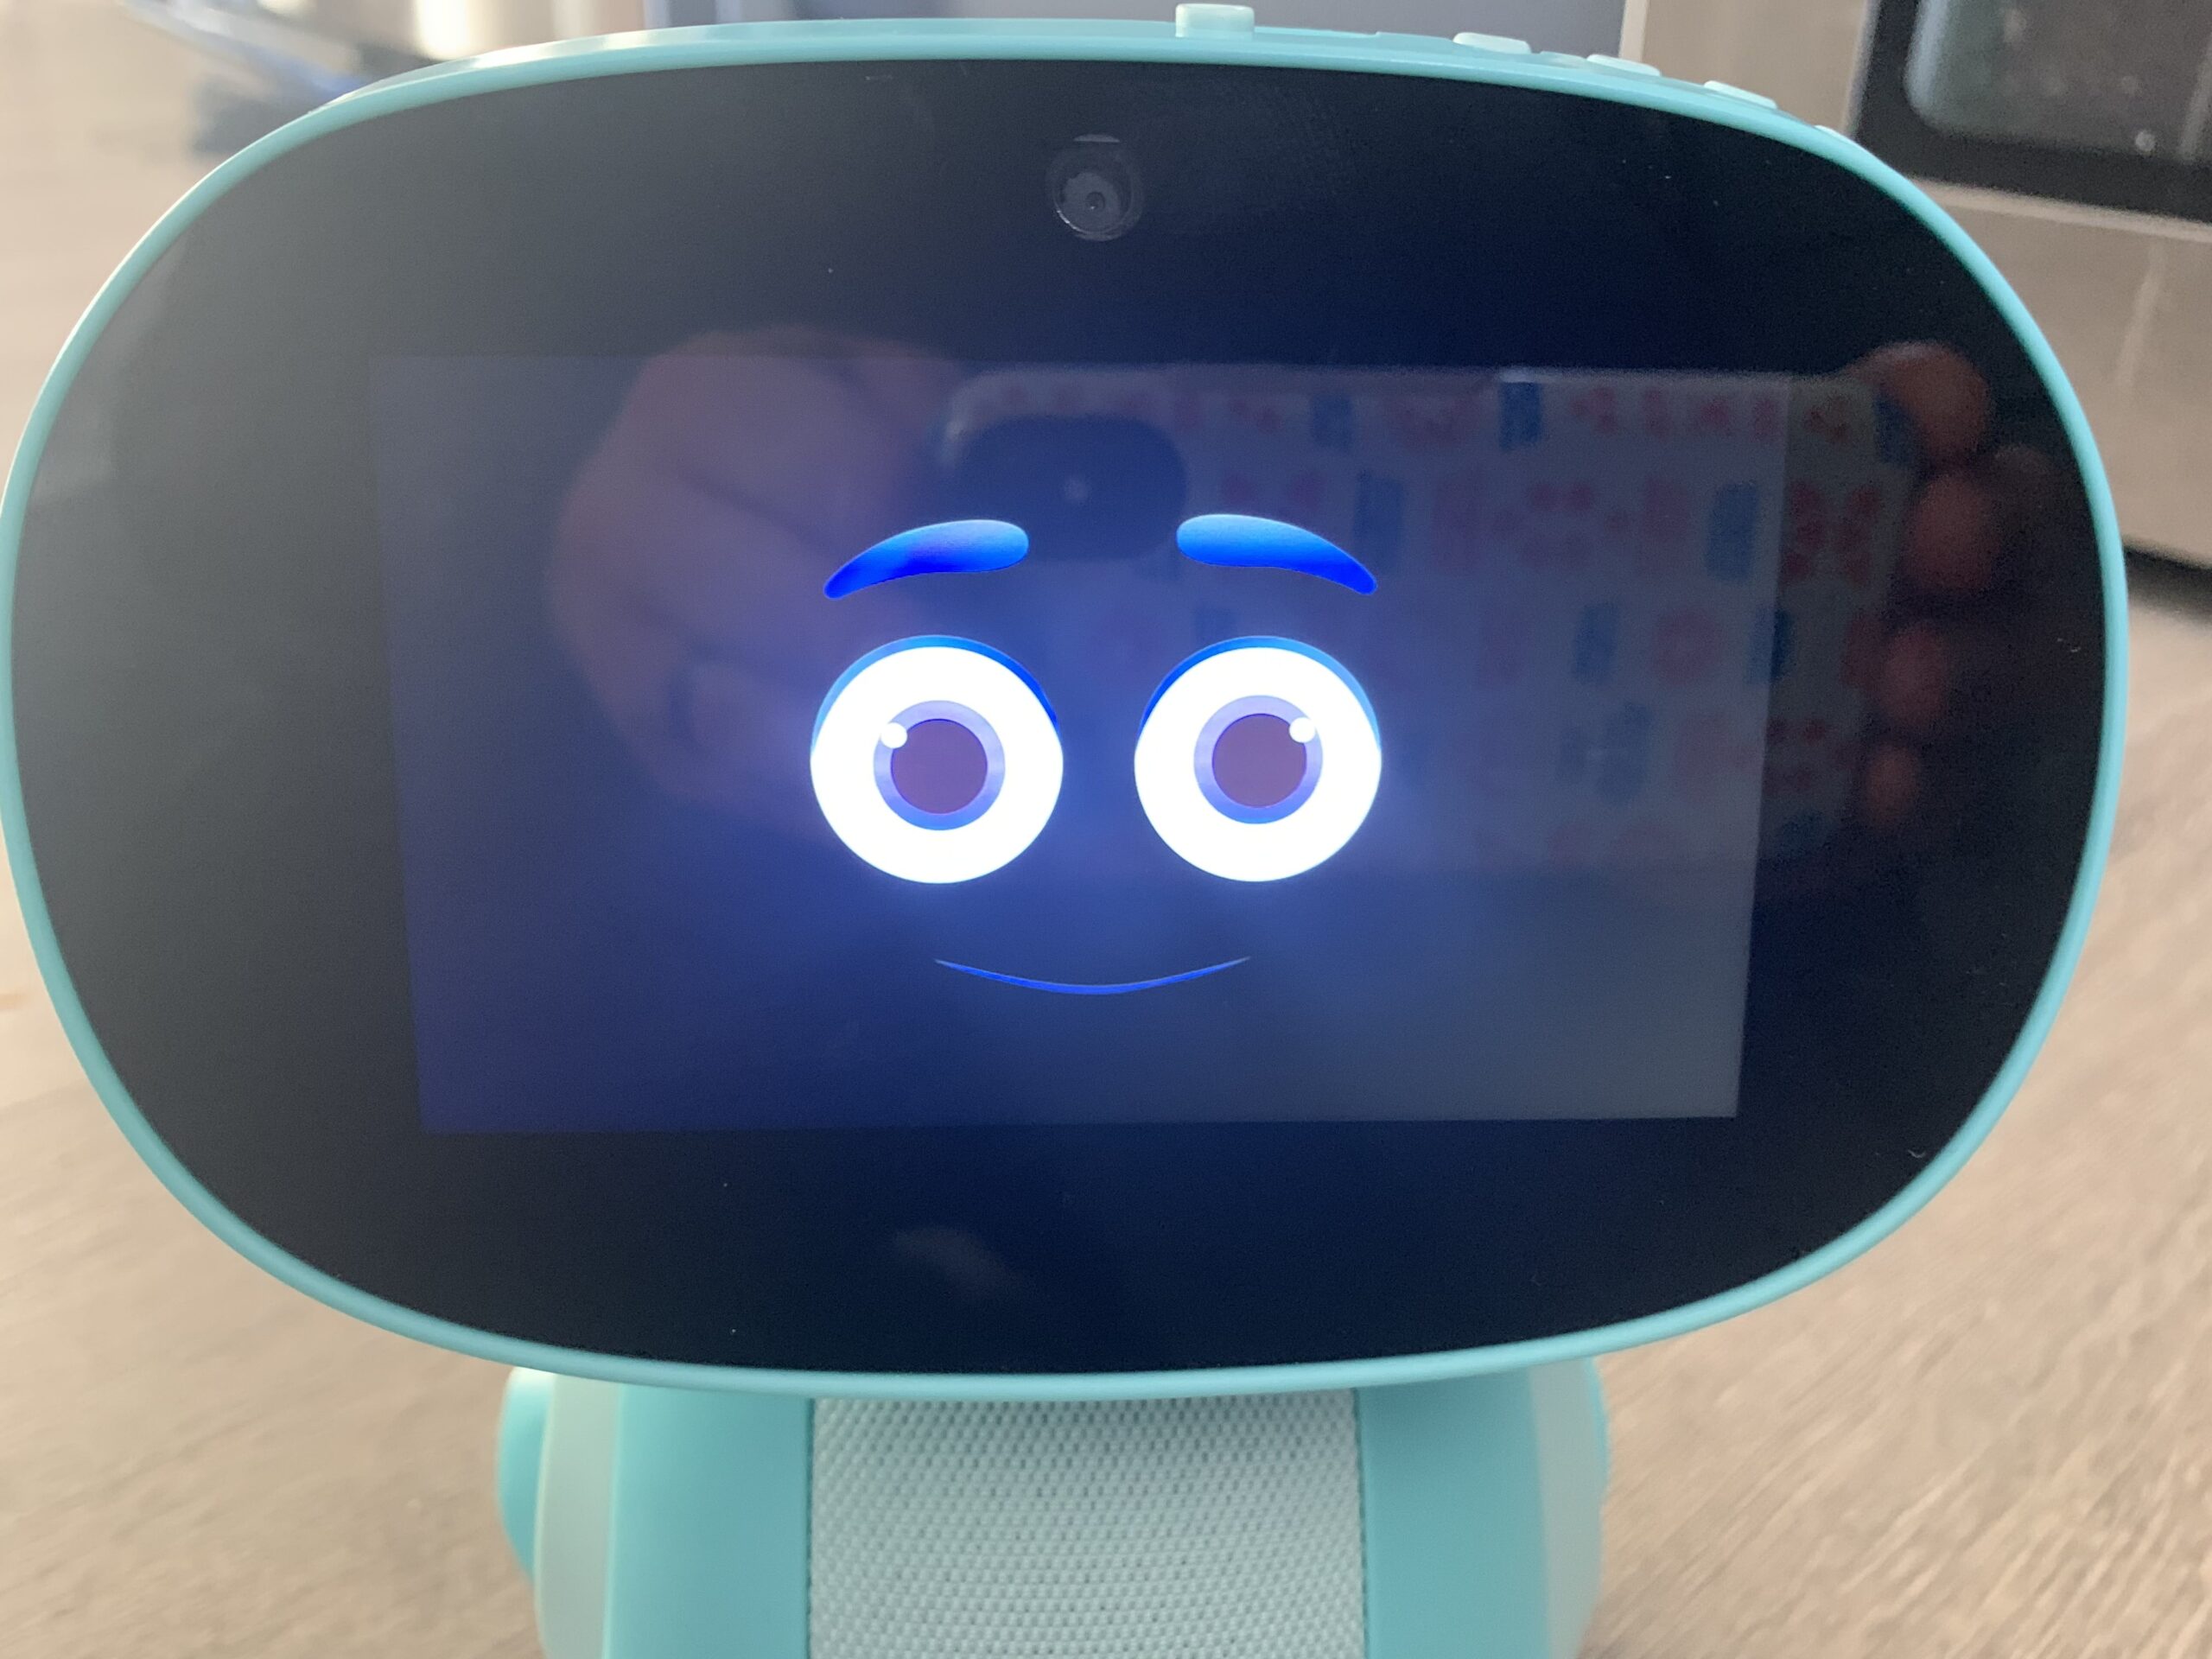 Authentic Miko 3: AI-Powered Smart Robot for Kids Blue is your best choice